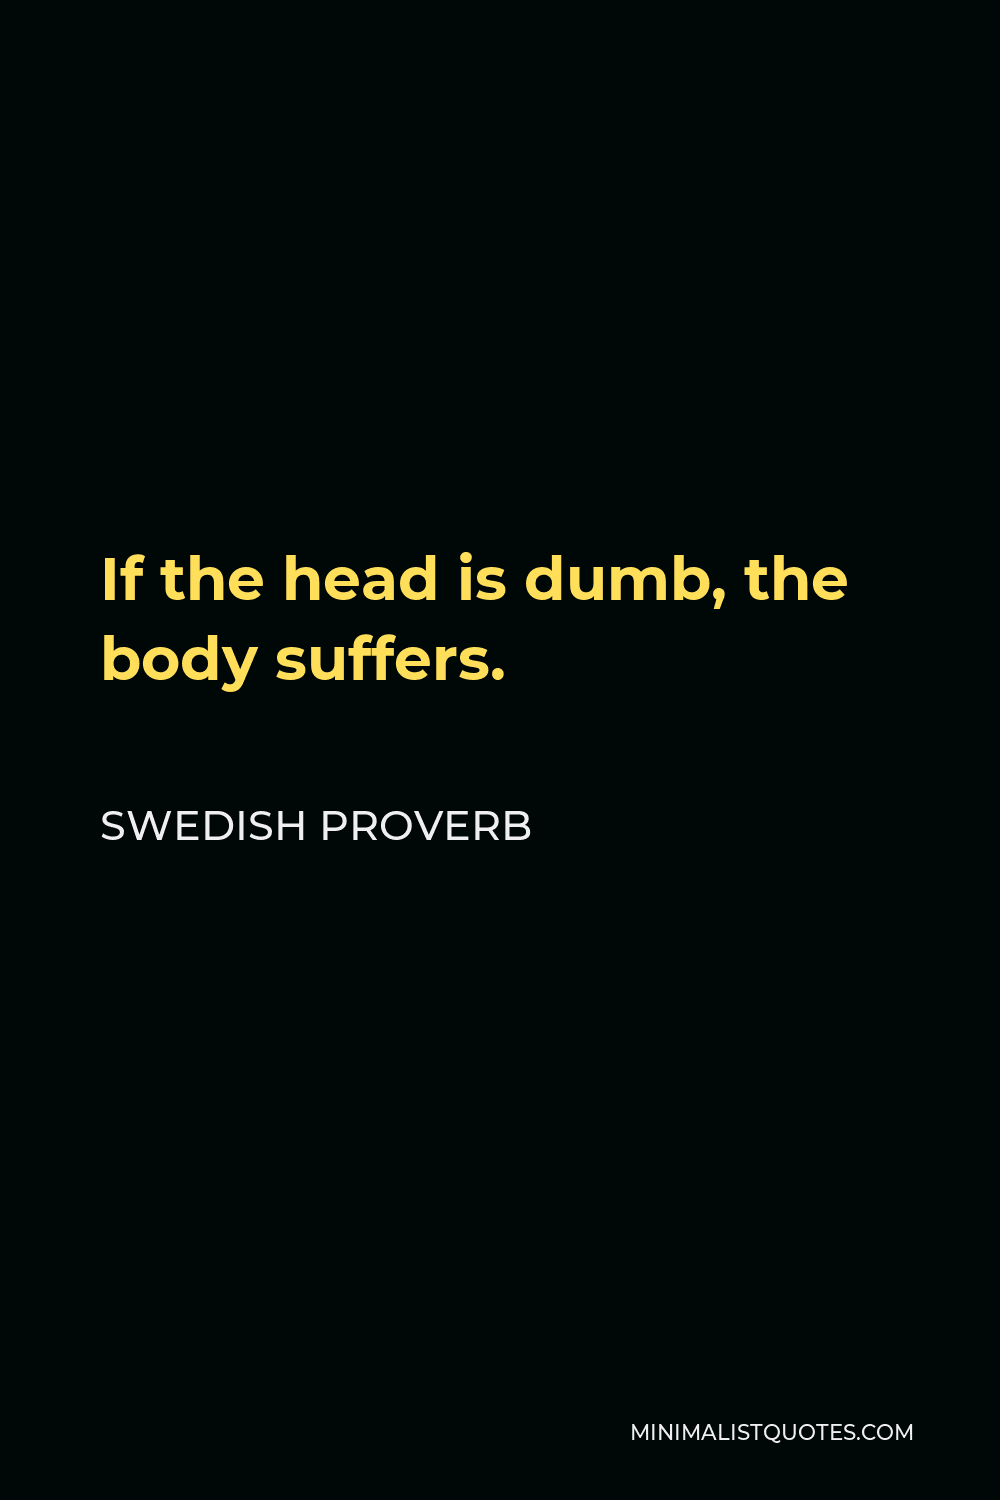 Swedish Proverb Quote - If the head is dumb, the body suffers.